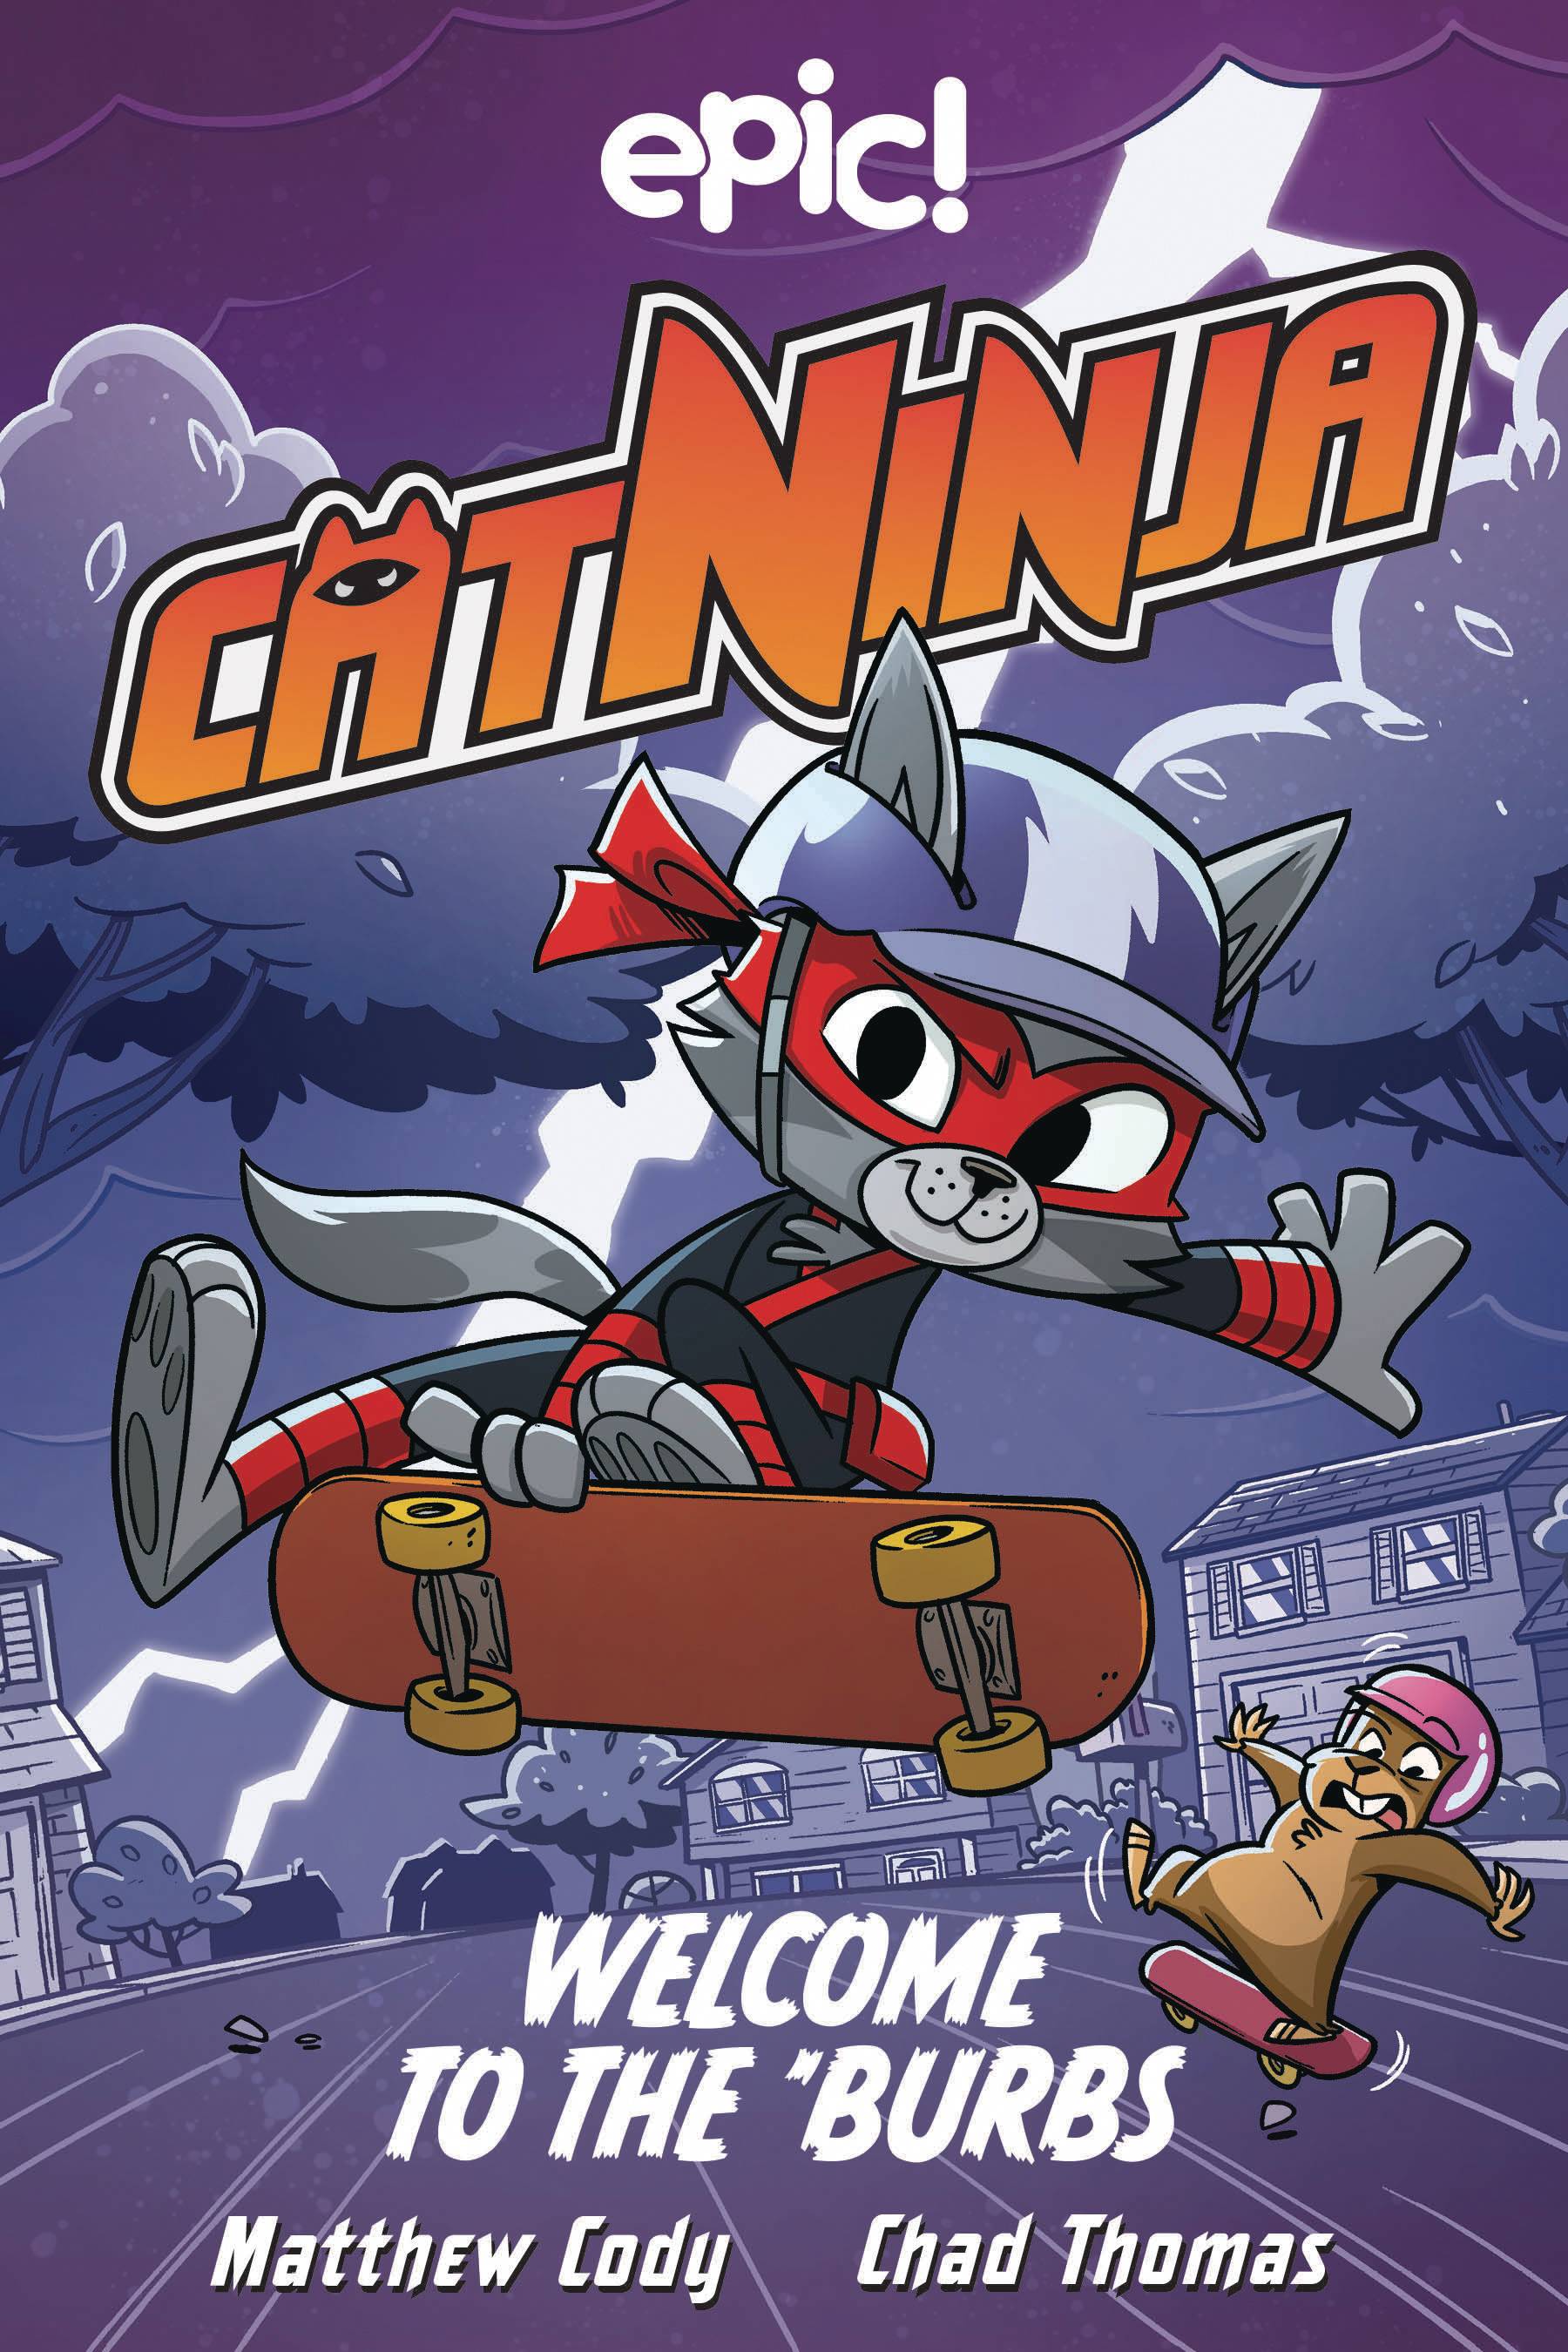 CAT NINJA GN VOL 04 WELCOME TO THE BURBS